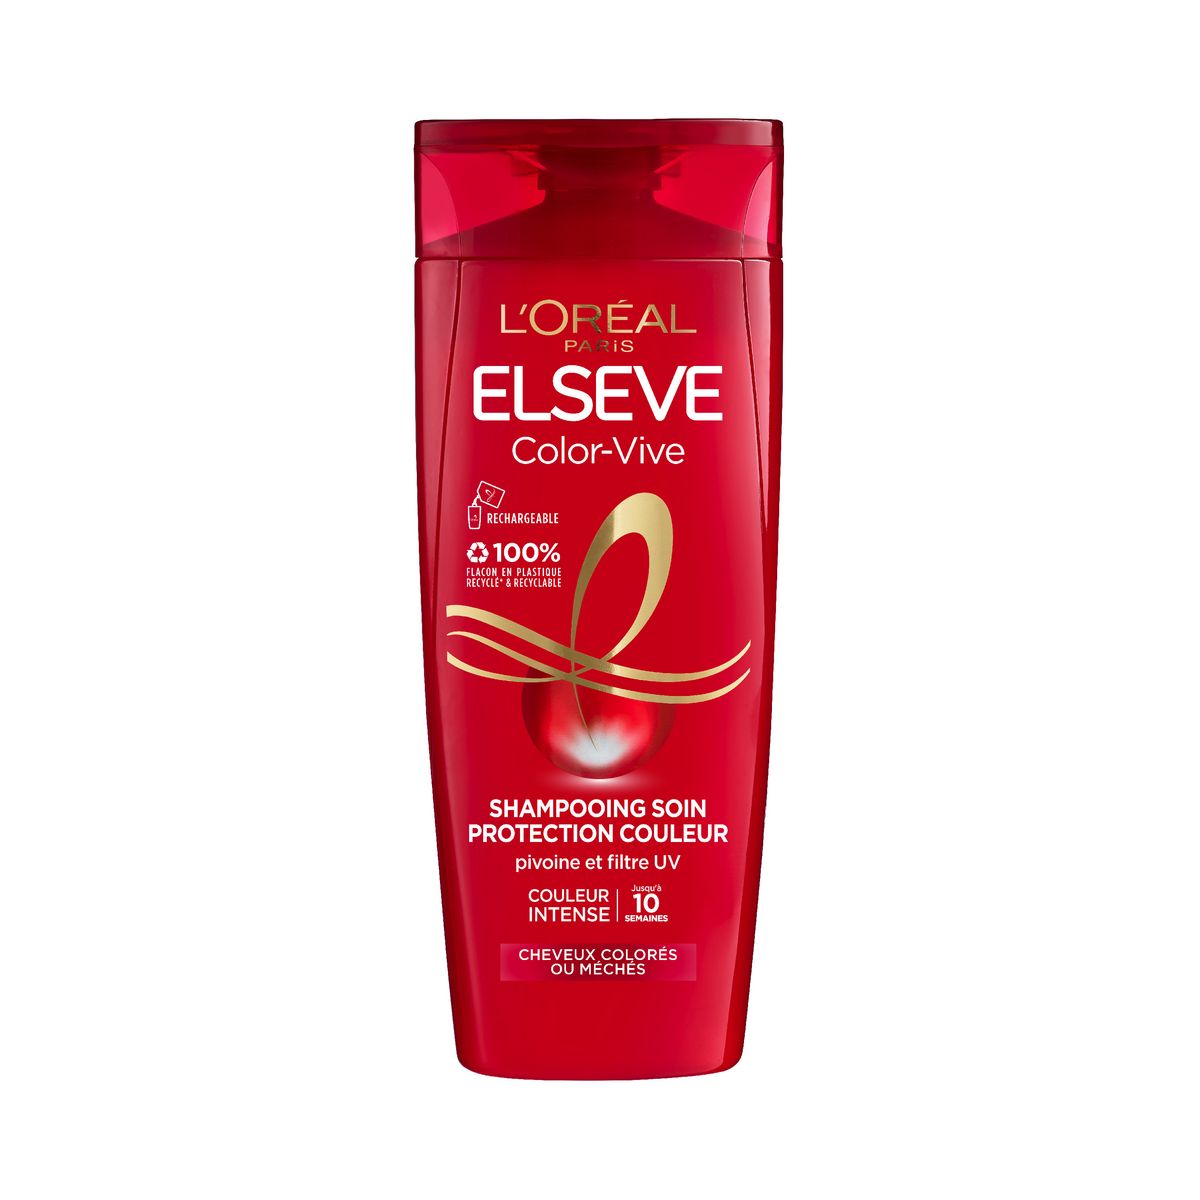 Color-Vive Color Protection Shampoo - L'Oréal Buy Online | My French Grocery